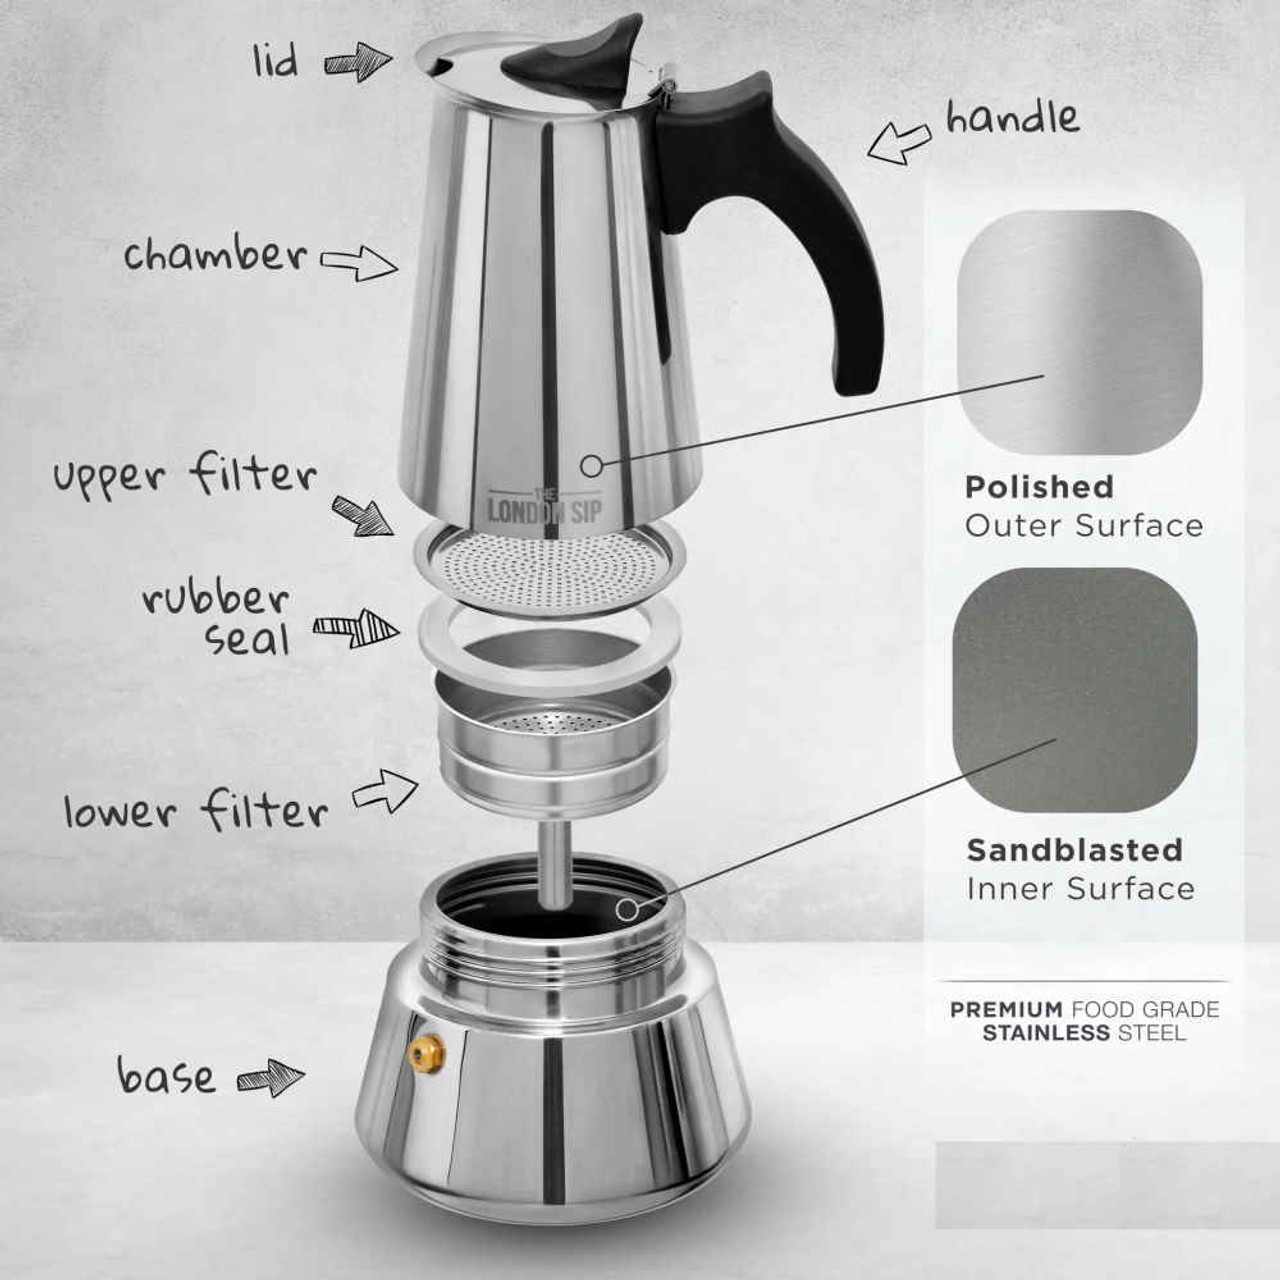 THE LONDON SIP EM10S Stainless Steel Stovetop Espresso Maker Instructions